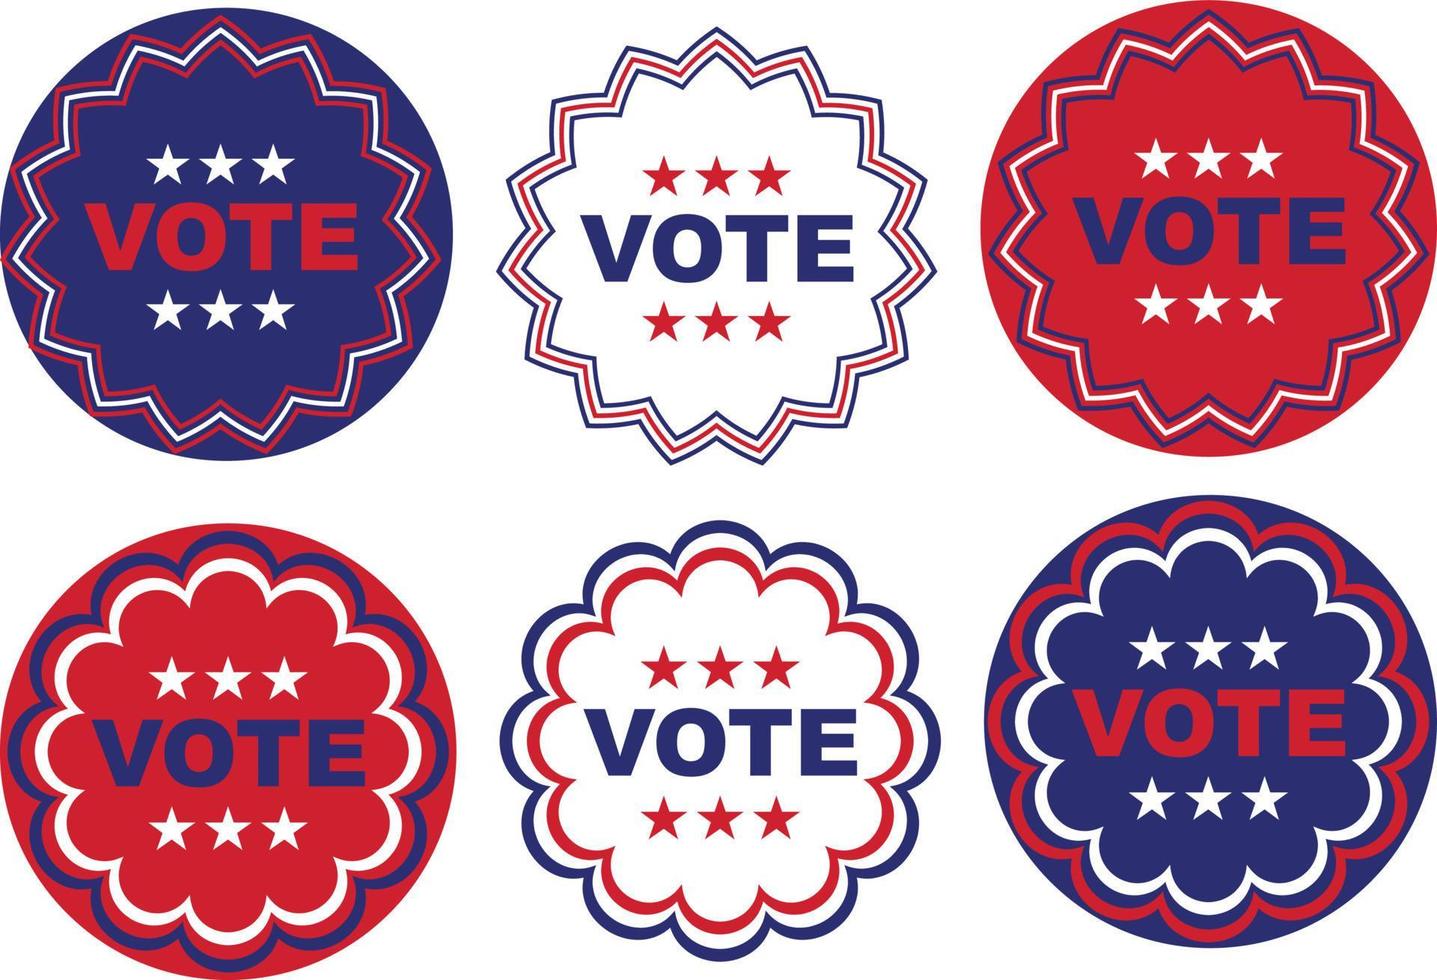 red white blue Vote circular signs with border patterns and stars vector